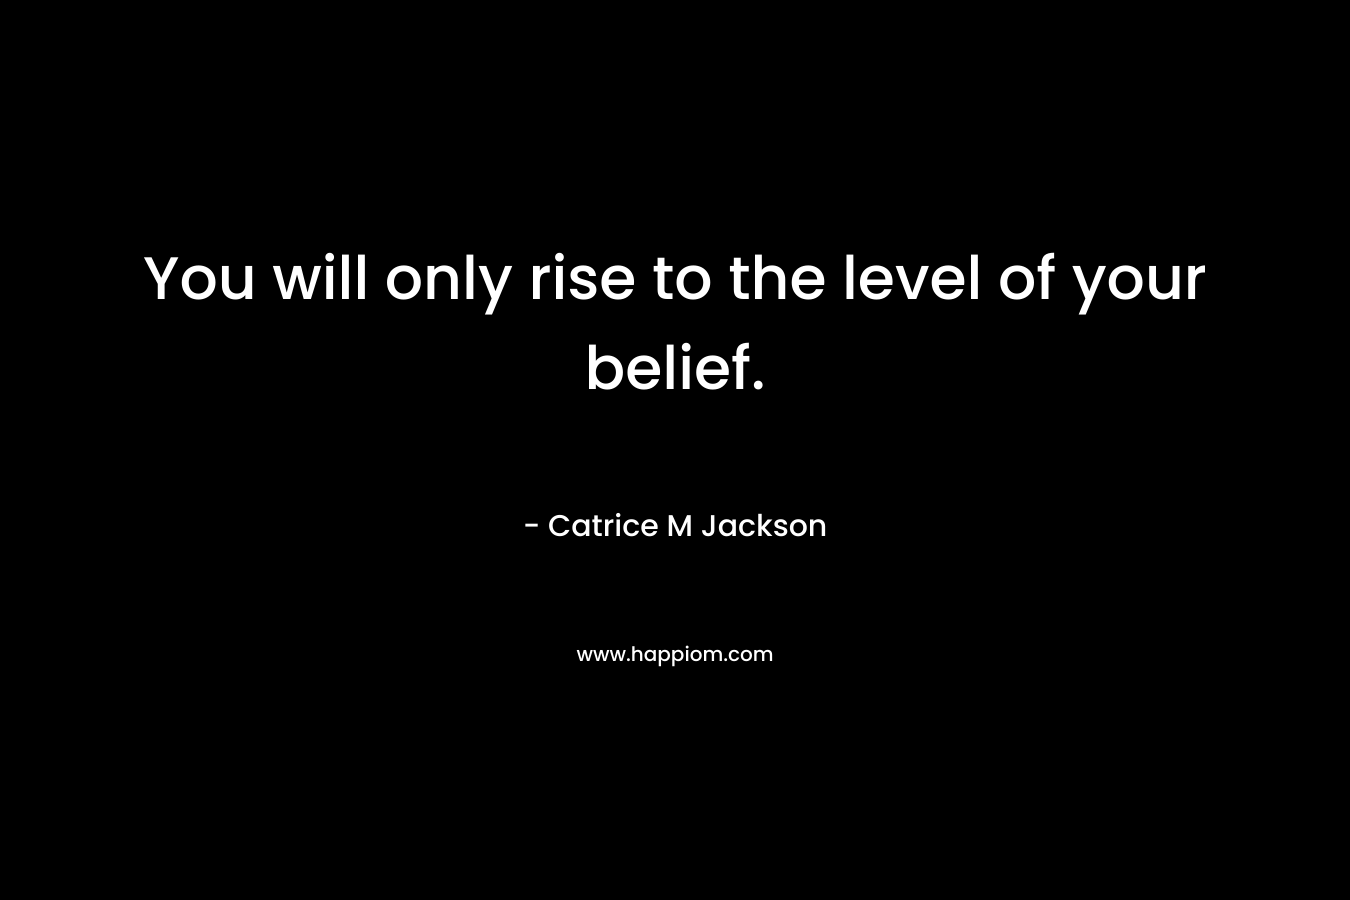 You will only rise to the level of your belief.